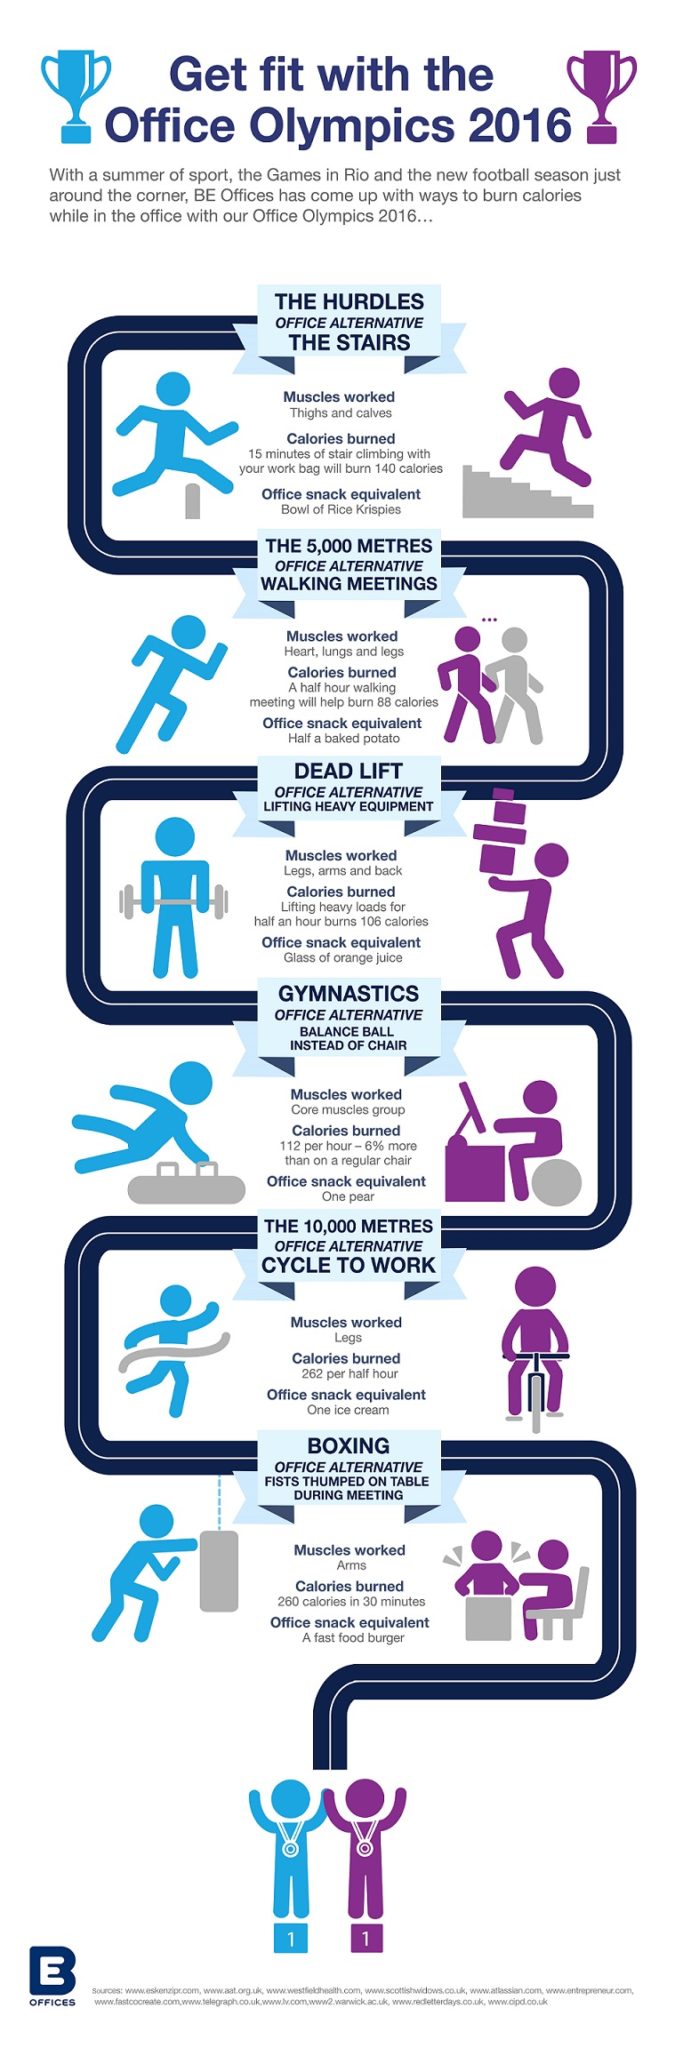 BE Office Olympics Infographic